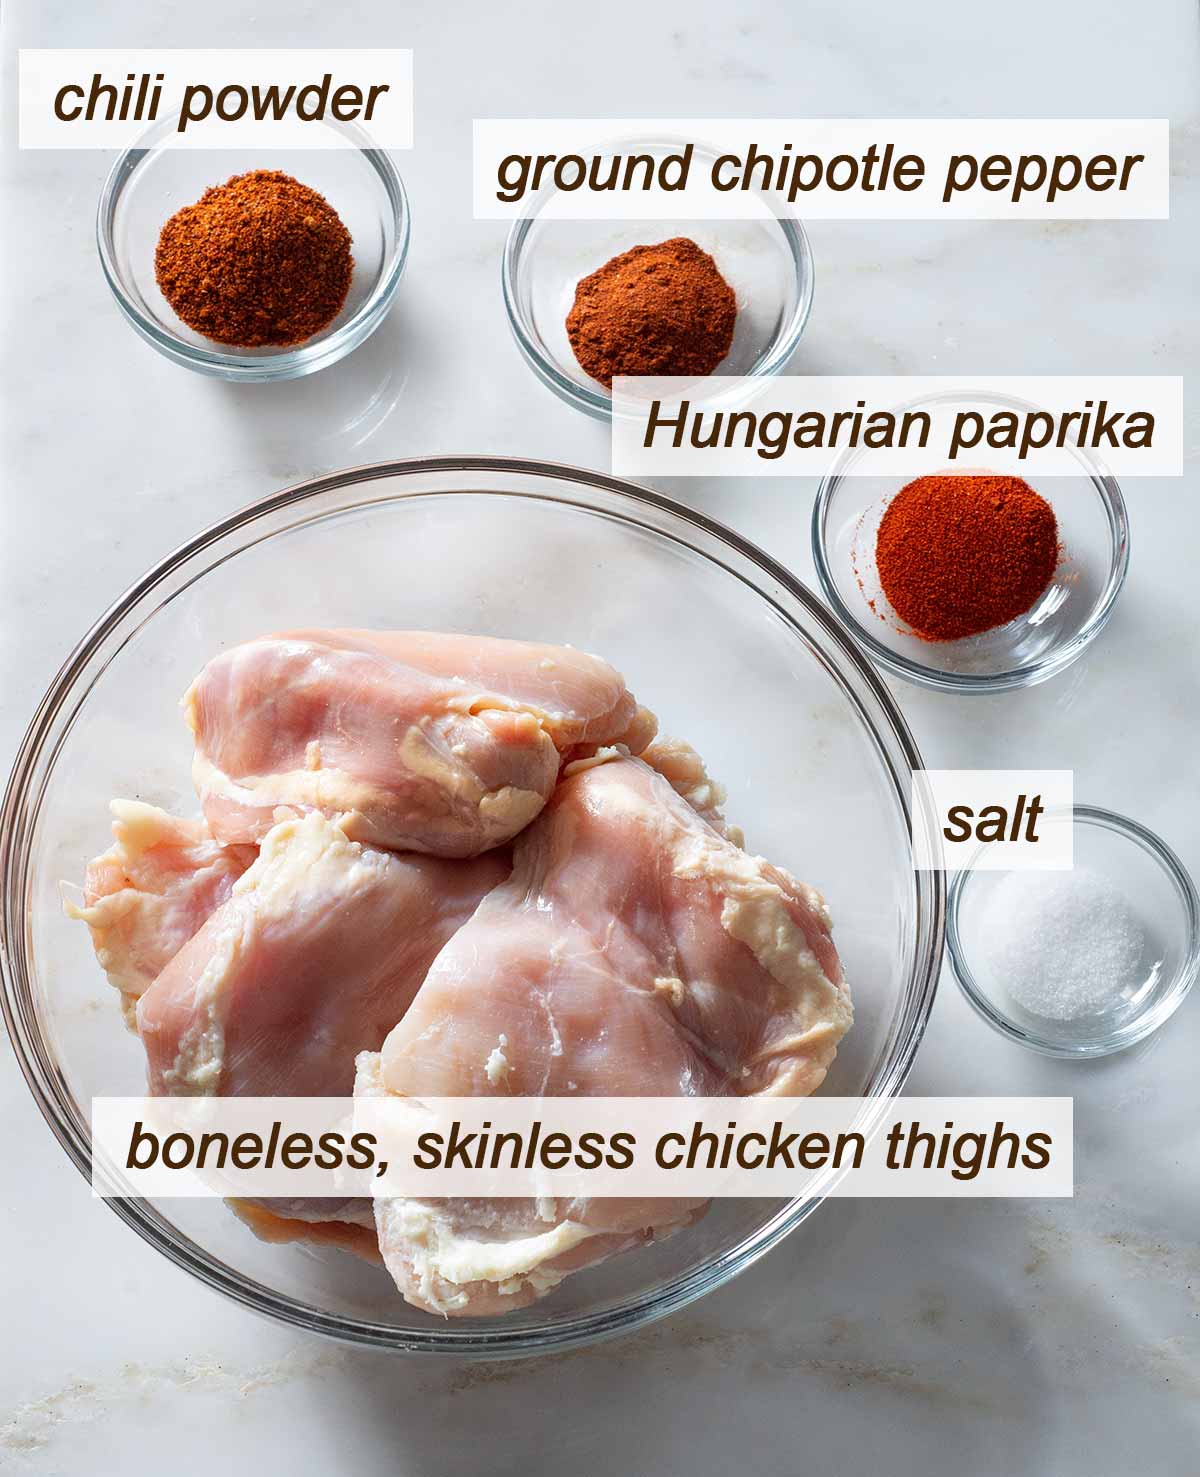 Ingredients for pulled chicken thighs on a table.